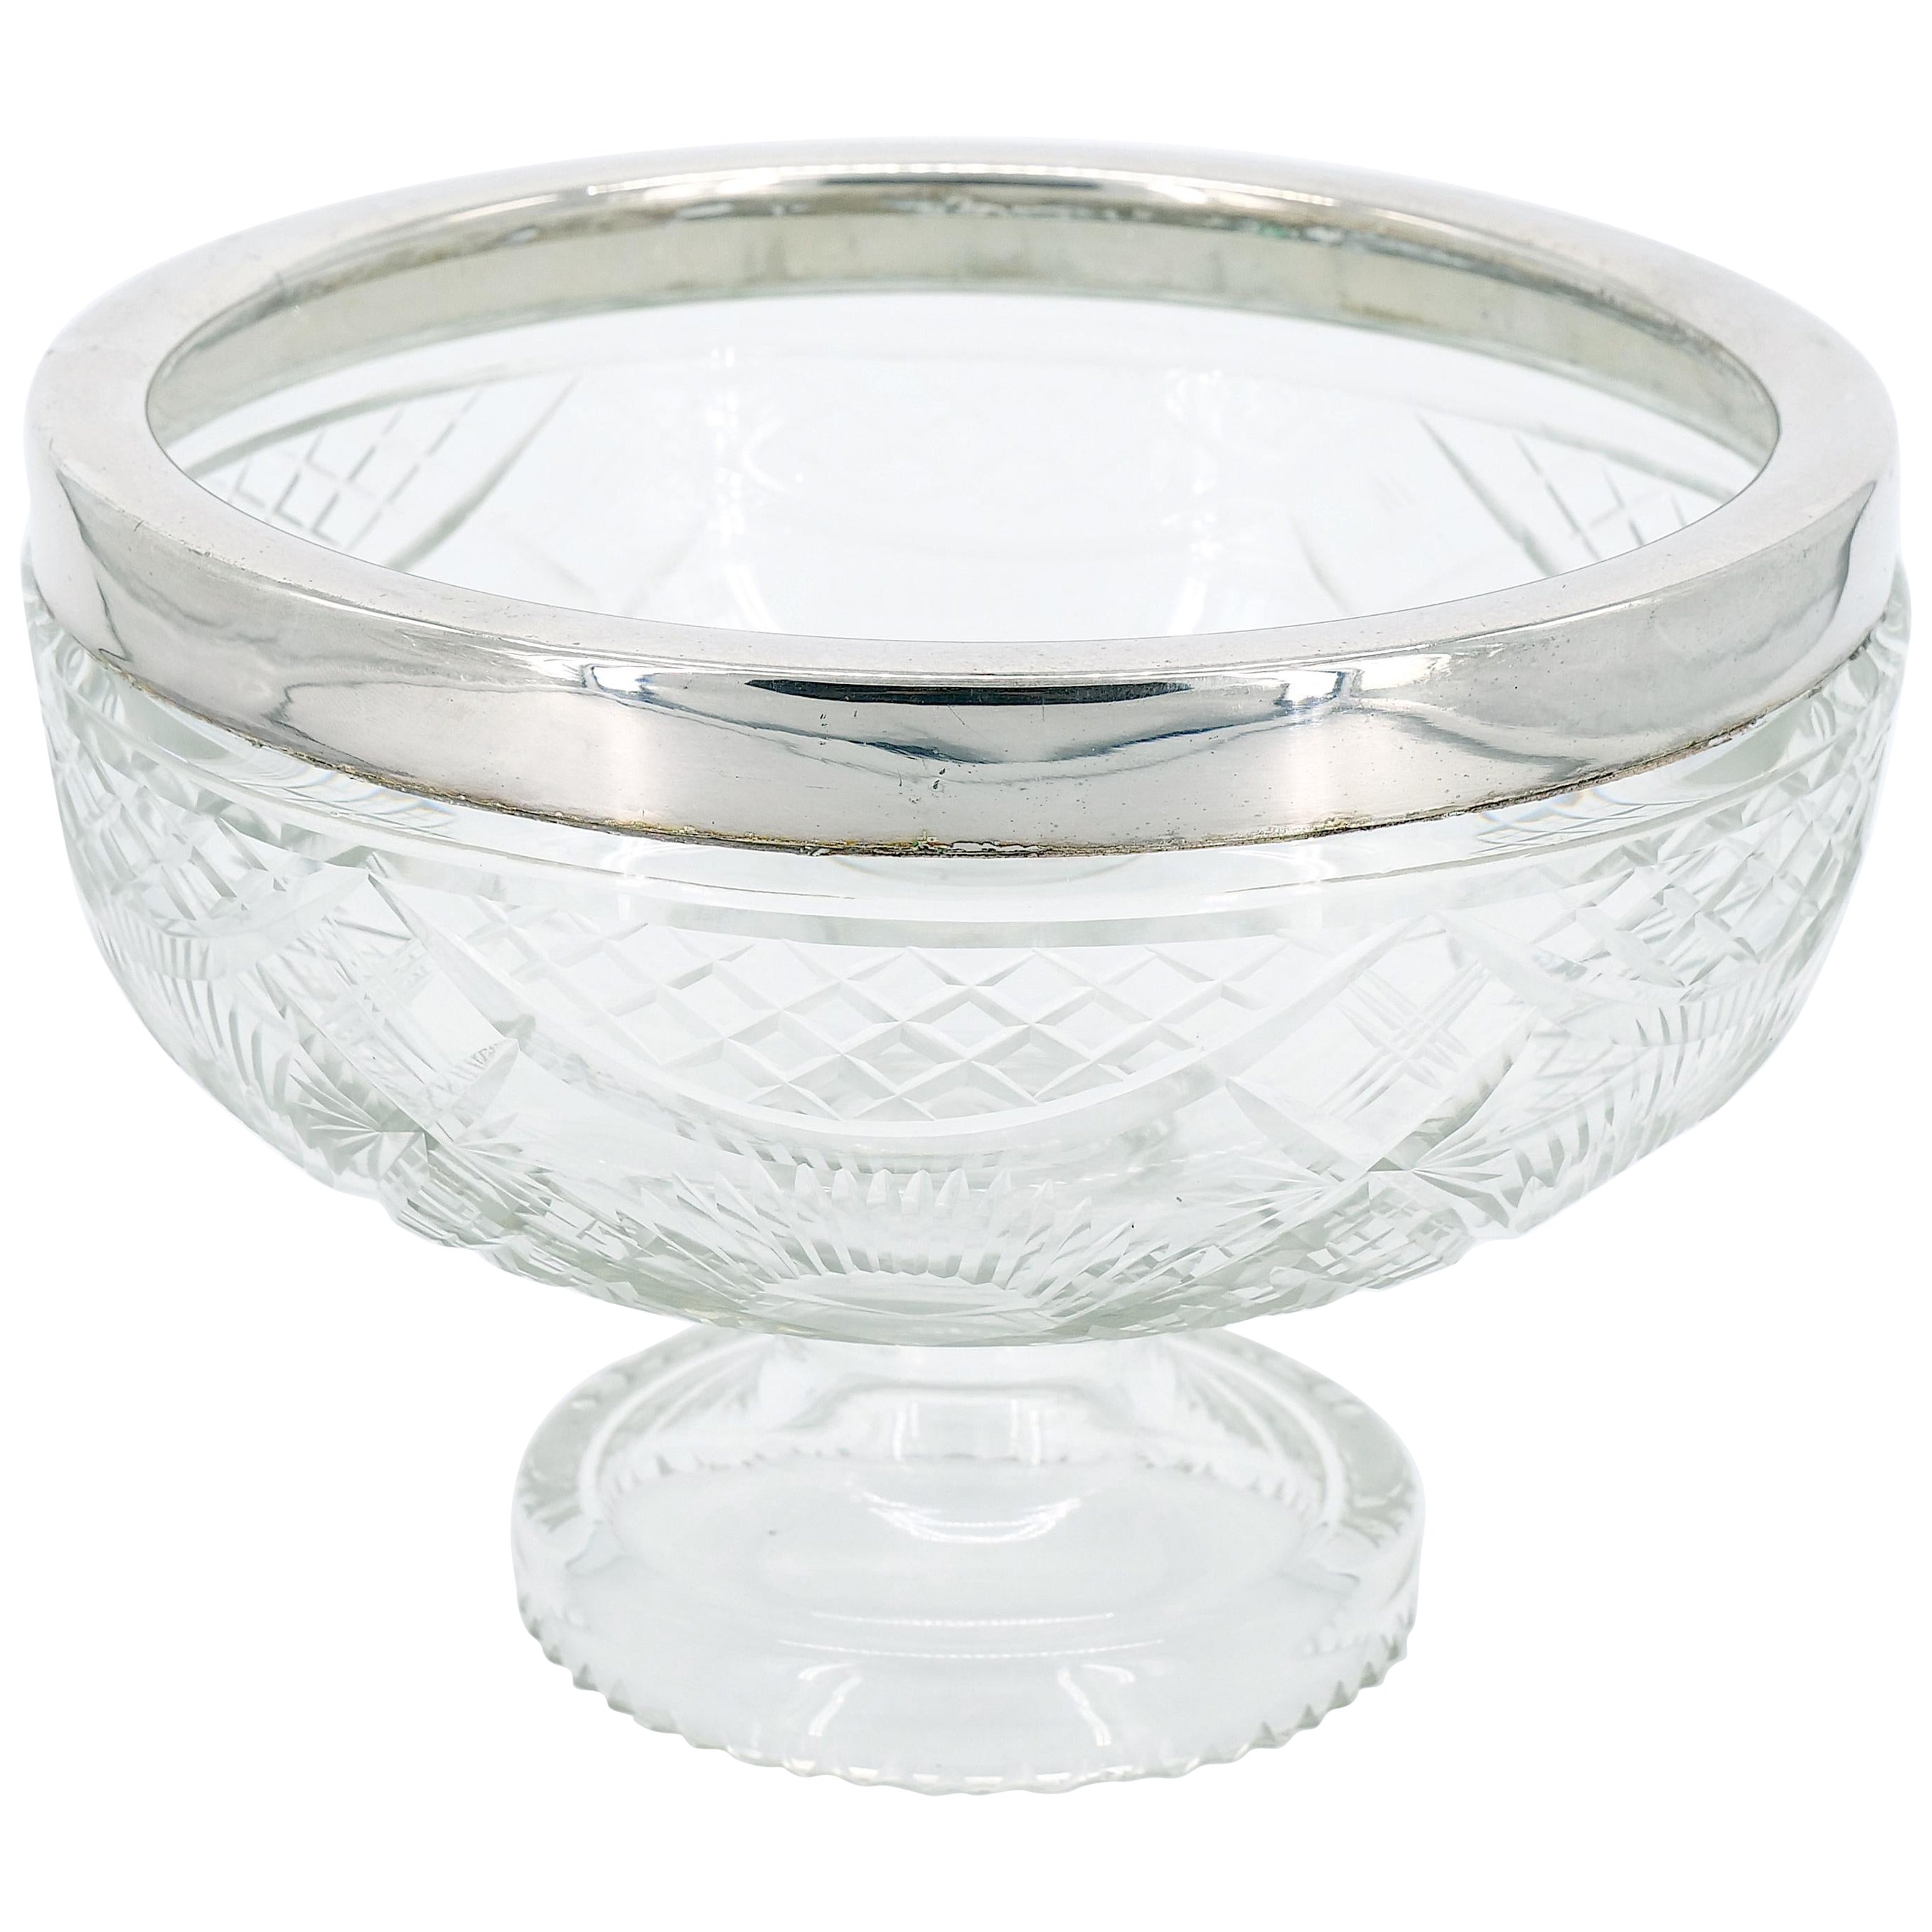 English Silver Plate Framed Top / Cut Glass Footed Serving Bowl For Sale